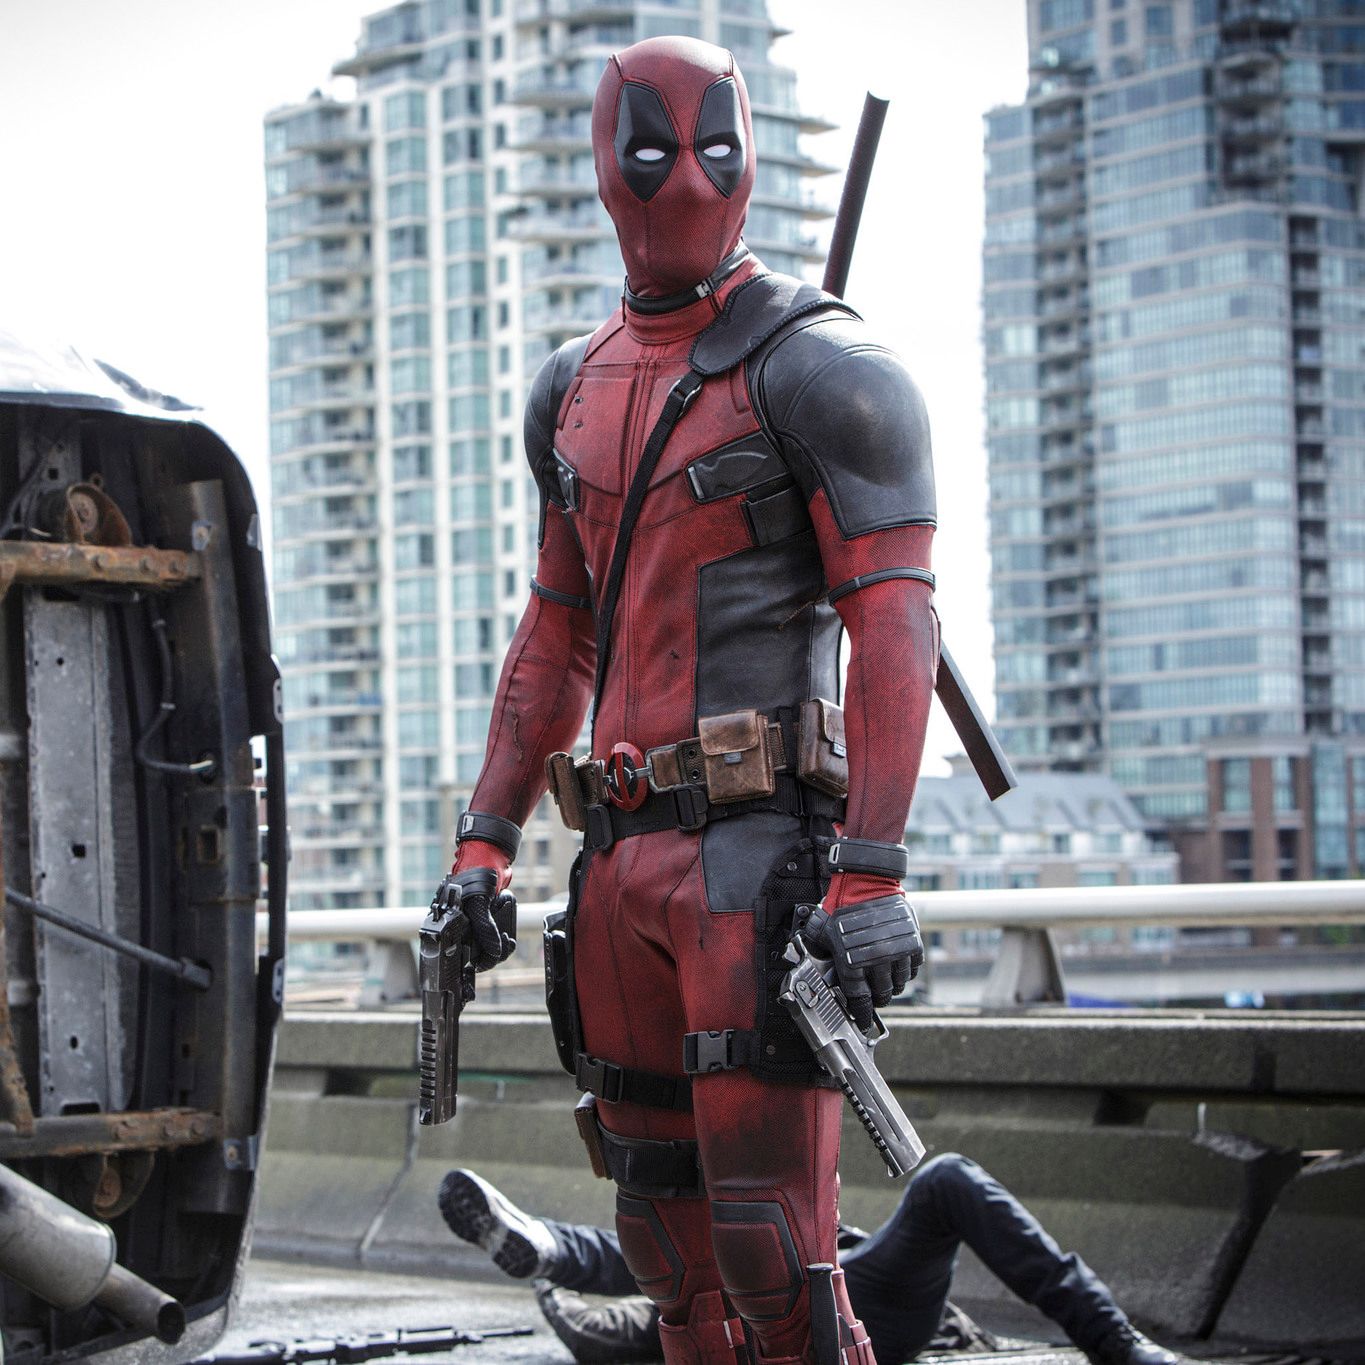 Scriptwriter says Deadpool 3 will 'absolutely' be rated R